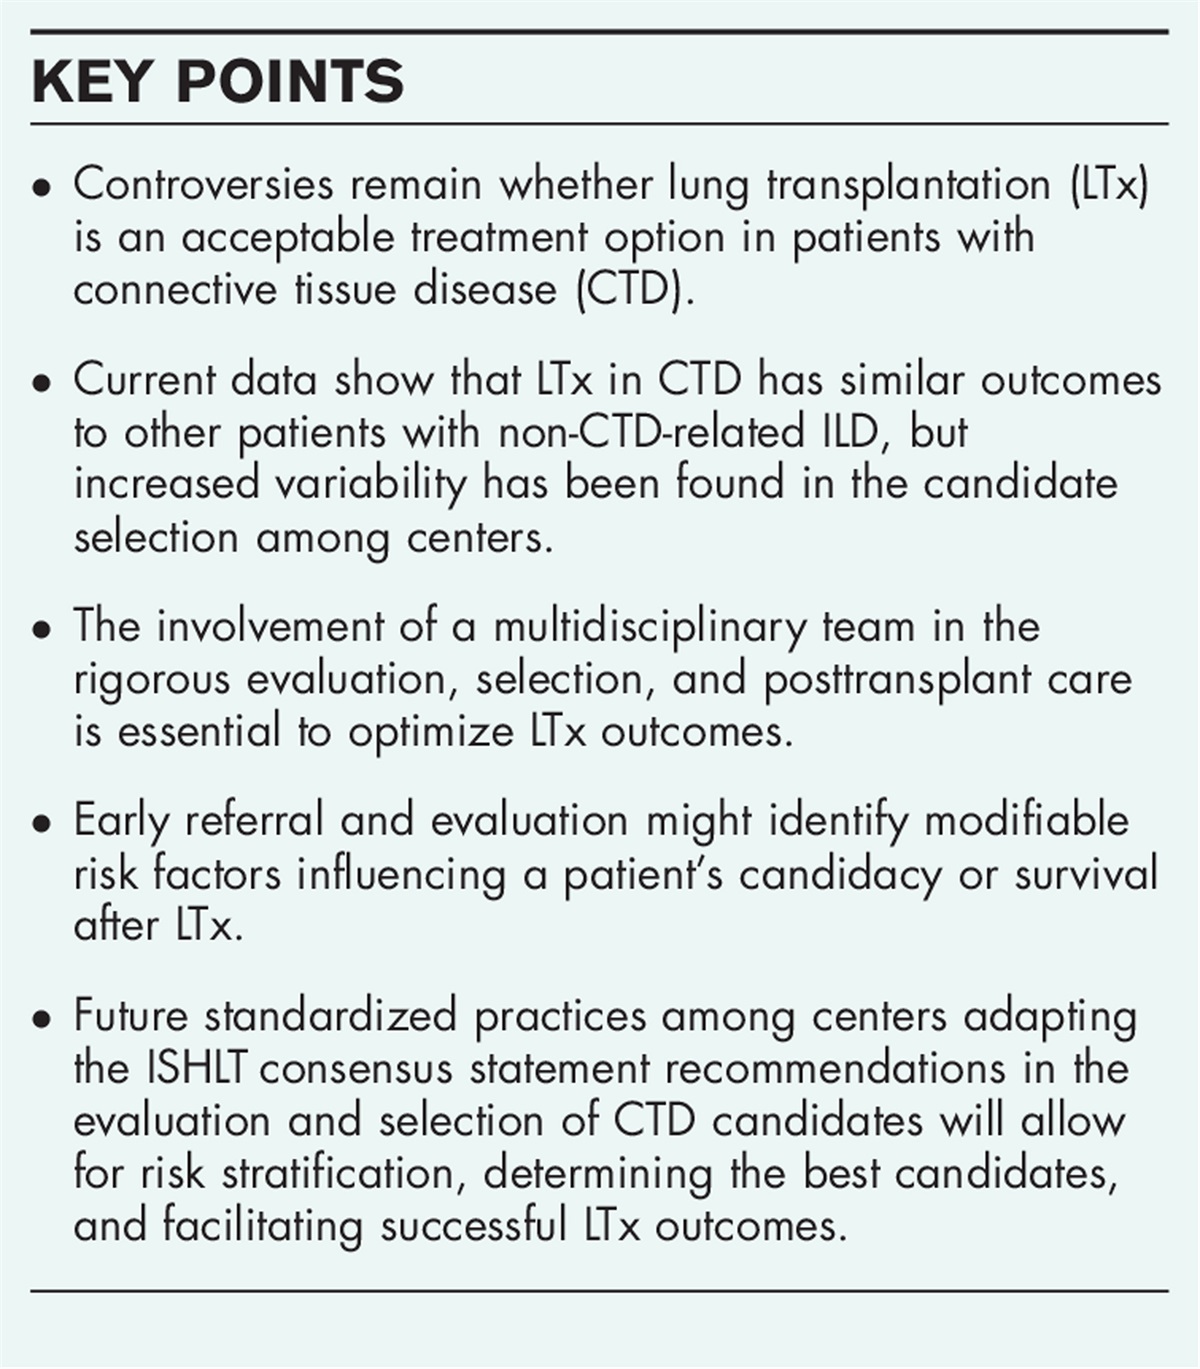 Managing connective tissue disease: how to select and facilitate successful transplantation